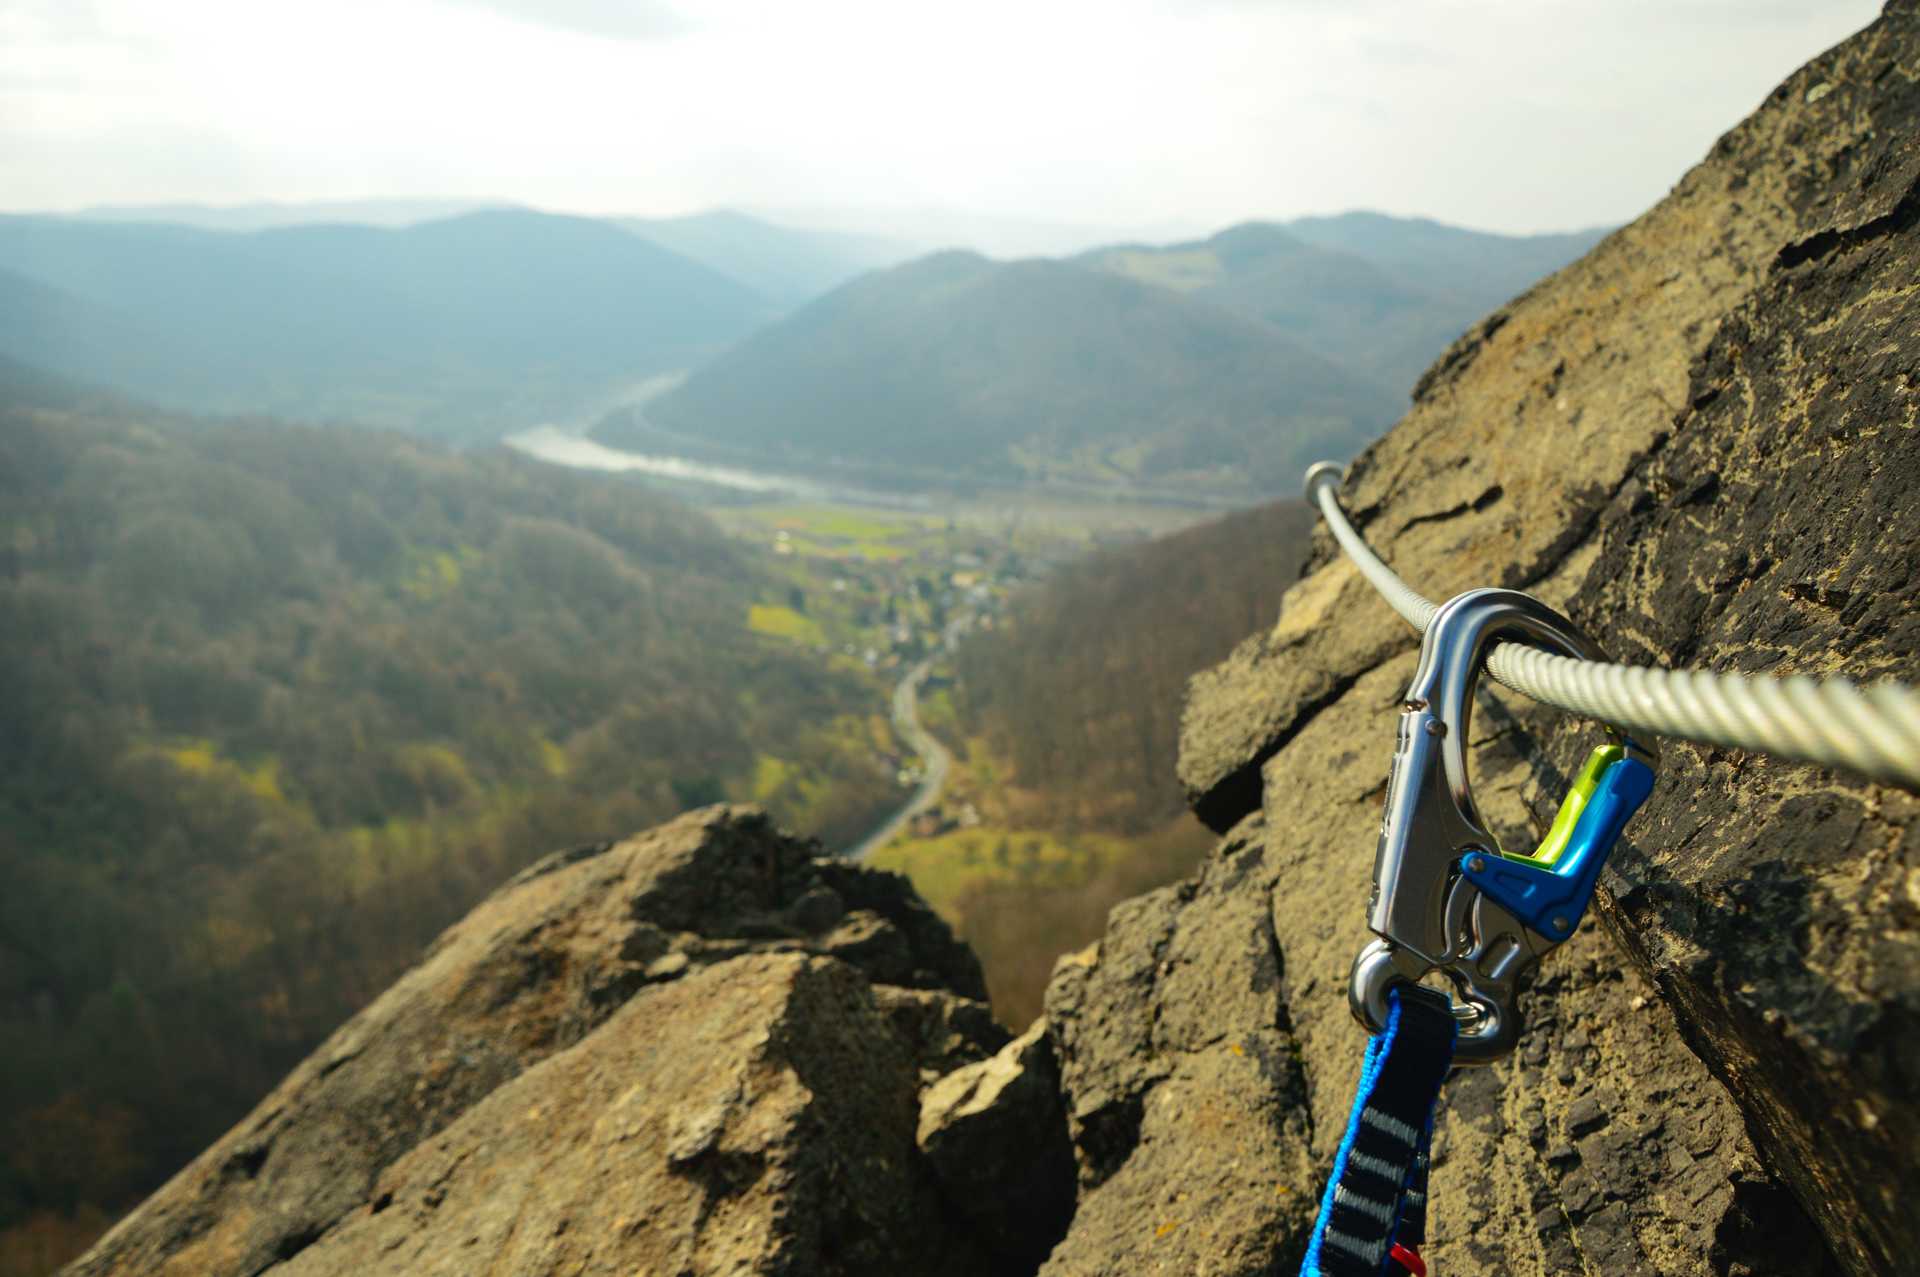 Carabiner clipped into steel wire across view of Italian mountains